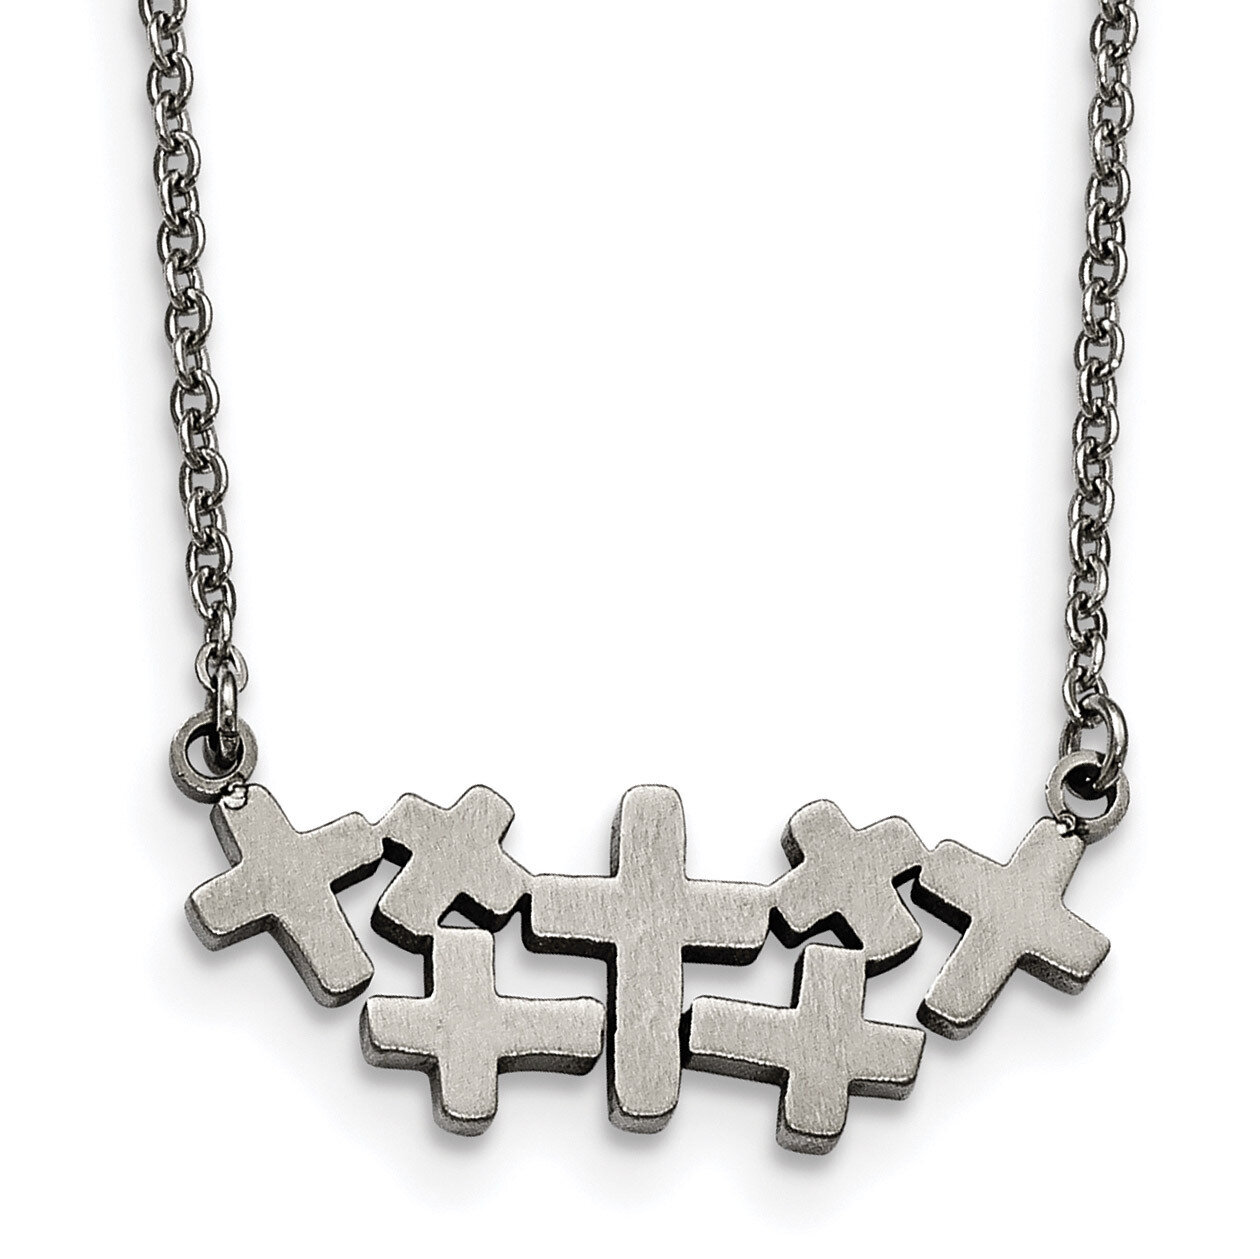 Multi Cross Necklace Stainless Steel Brushed and Polished SRN1857-17.5